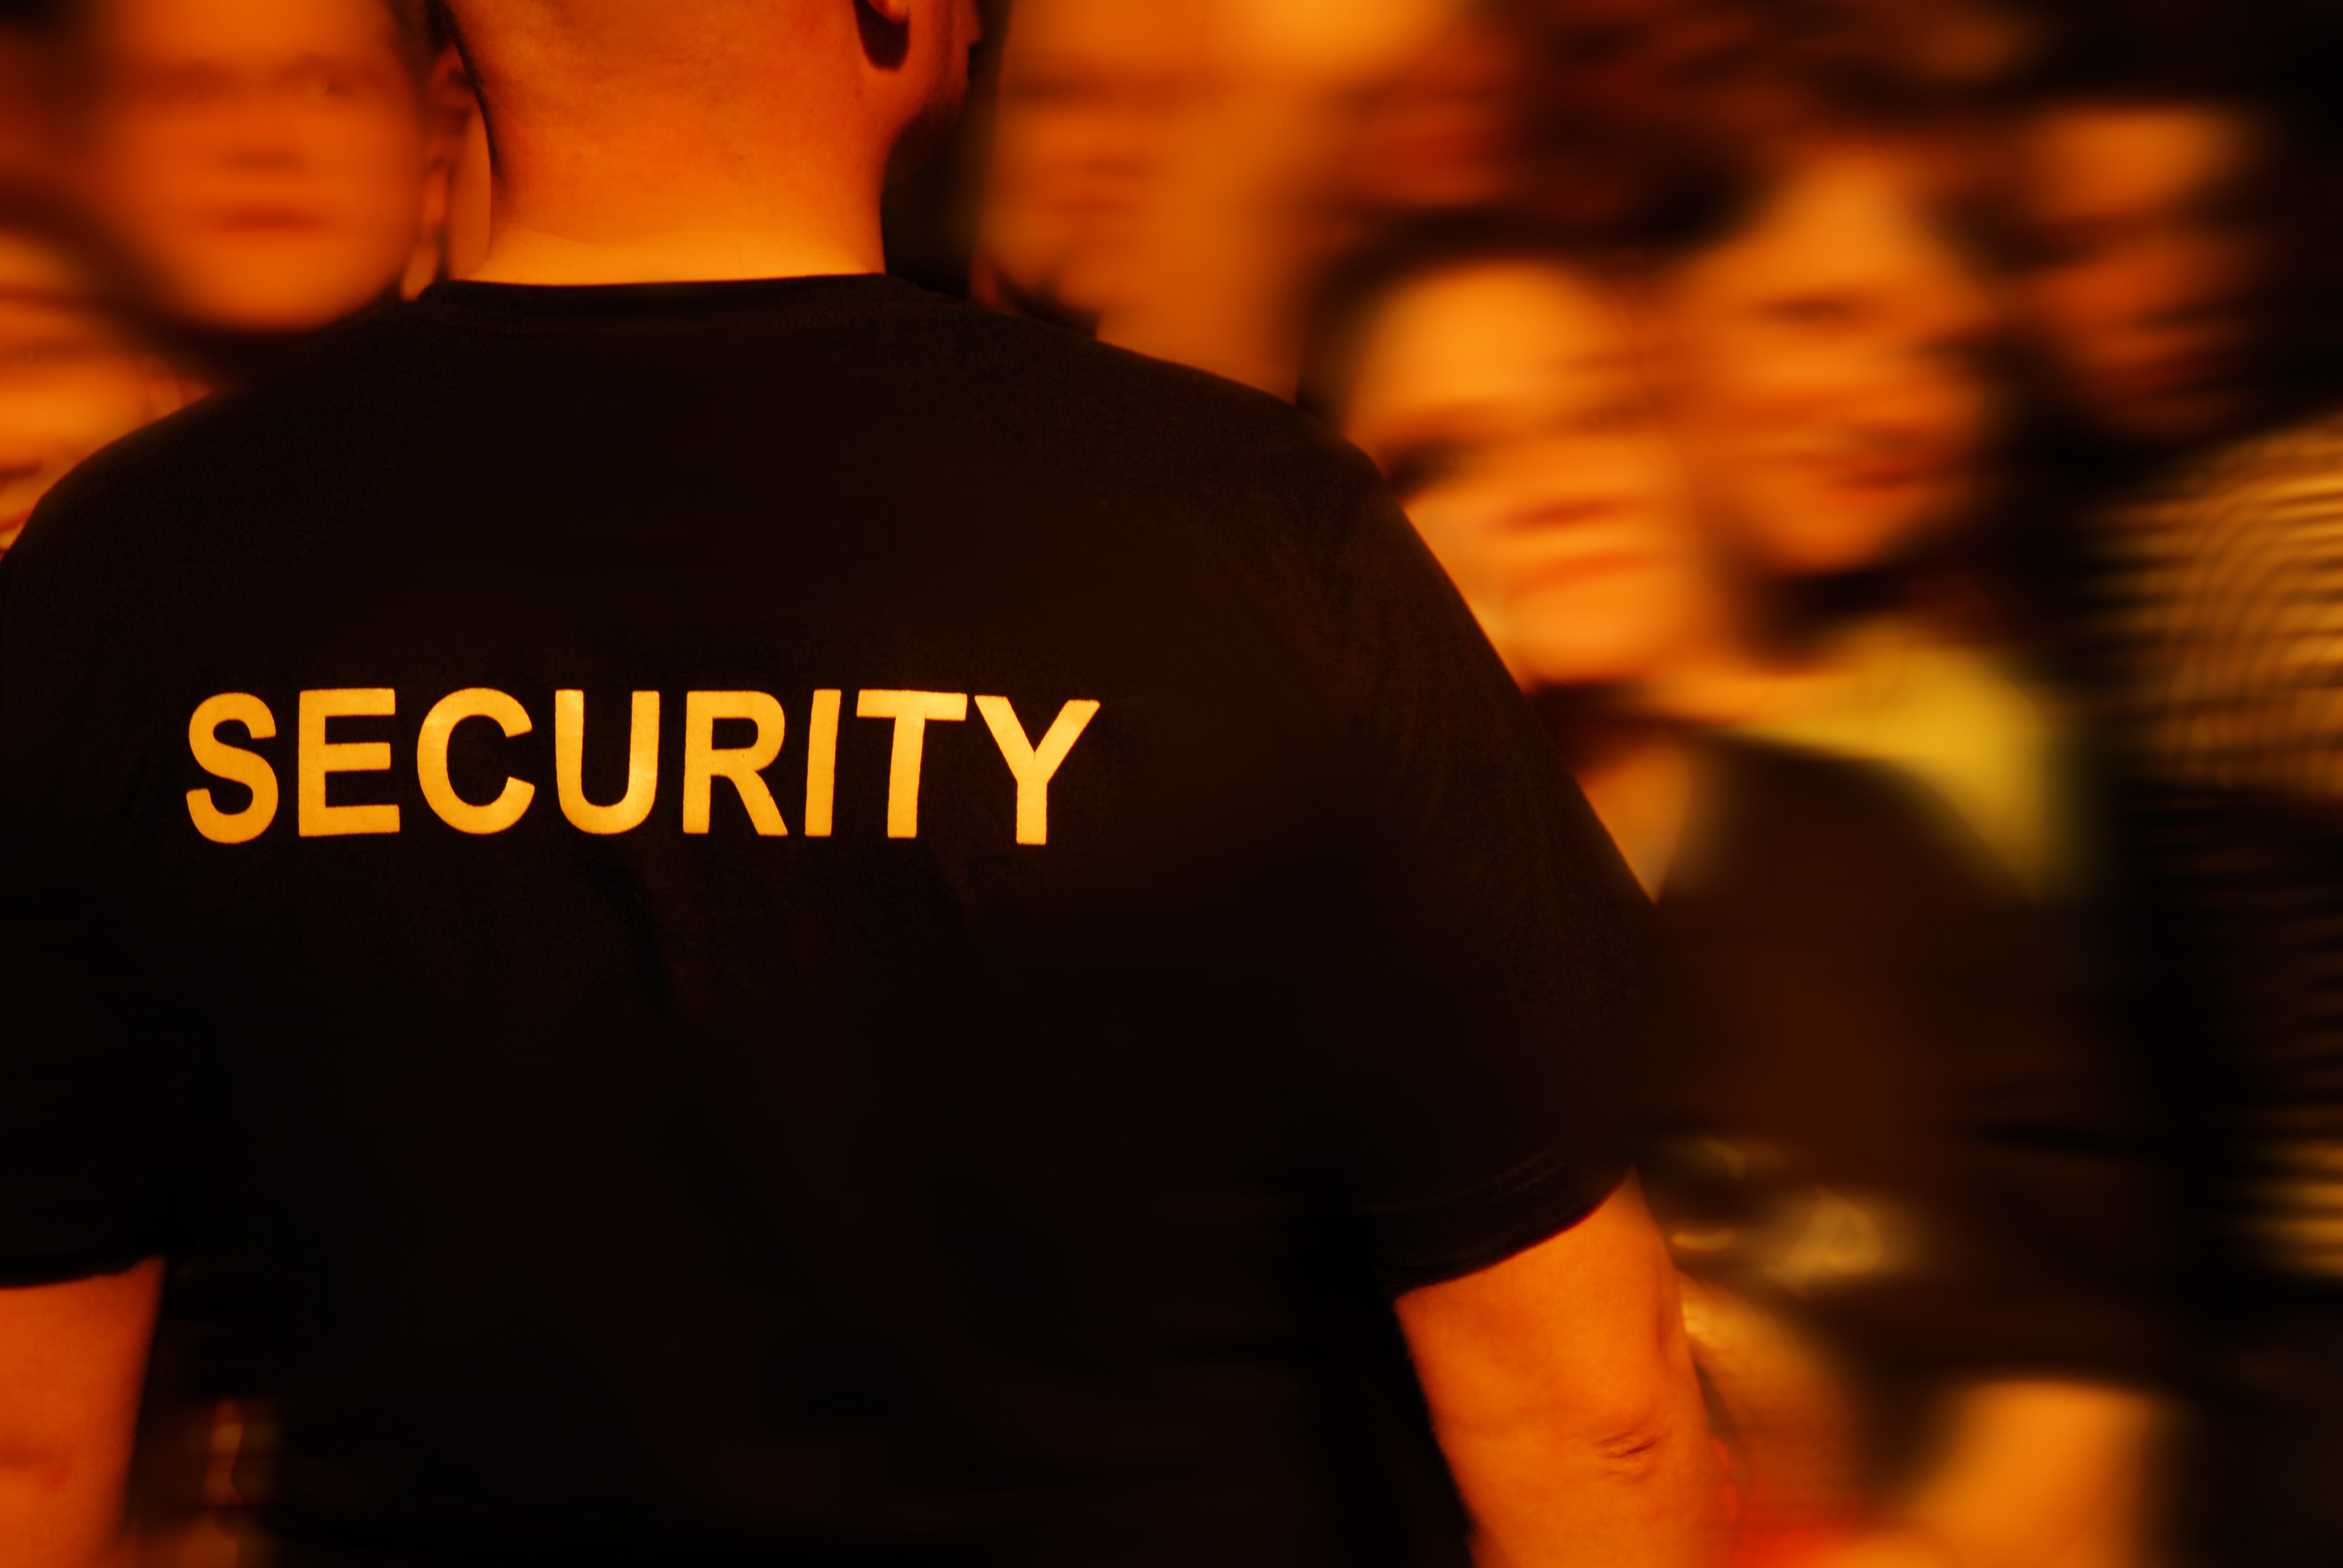 Bar Security: Keep Your Business Safe With These 3 Steps